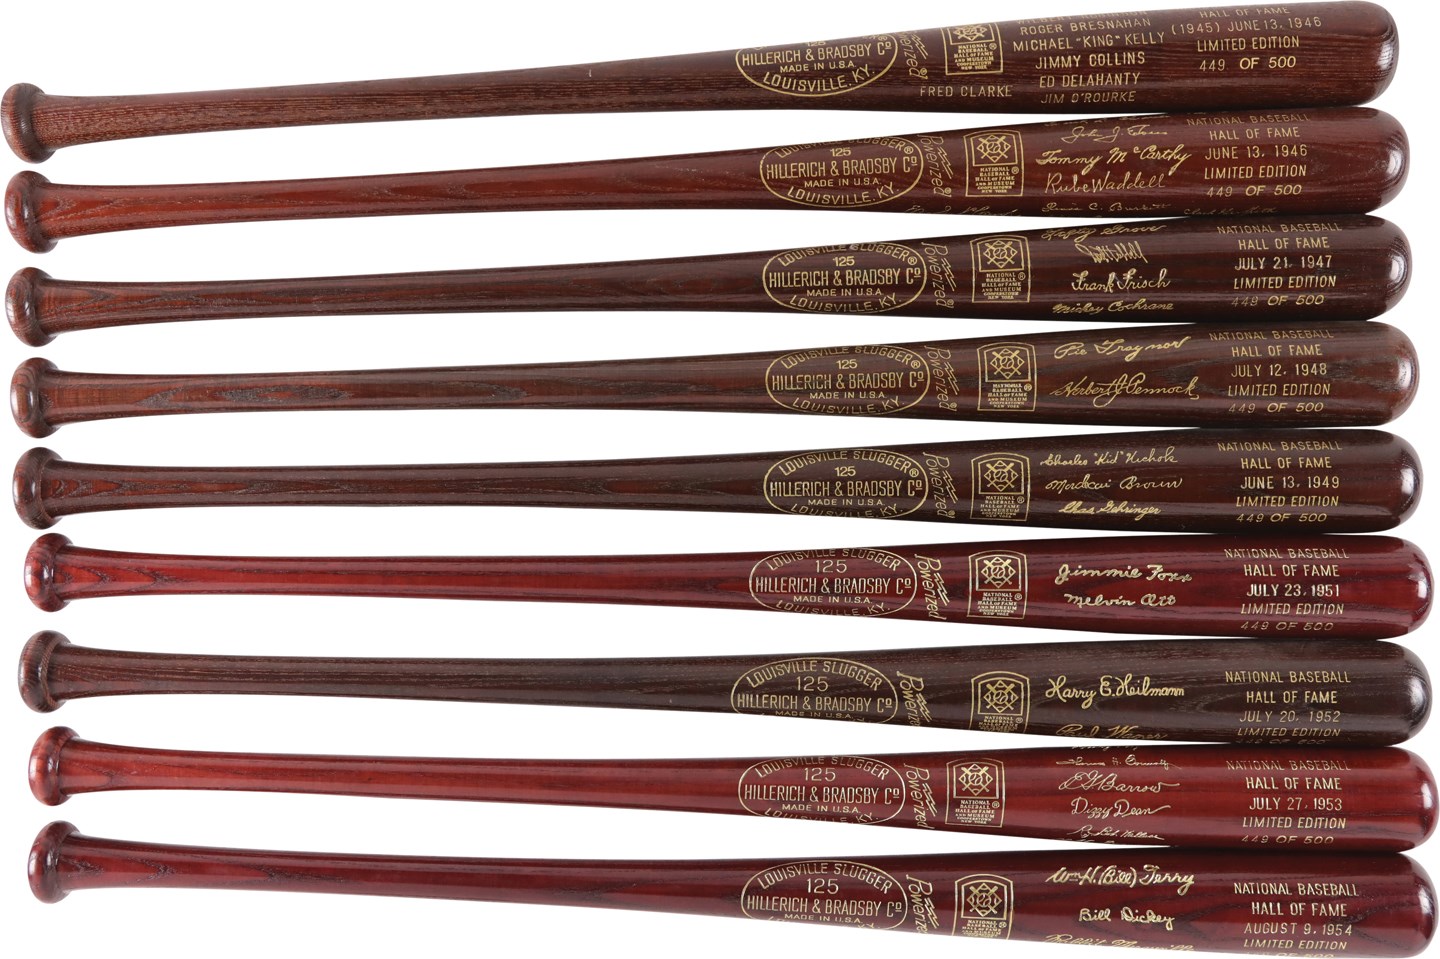 Baseball Memorabilia - Cooperstown Hall of Fame Bat Collection #449 (40)